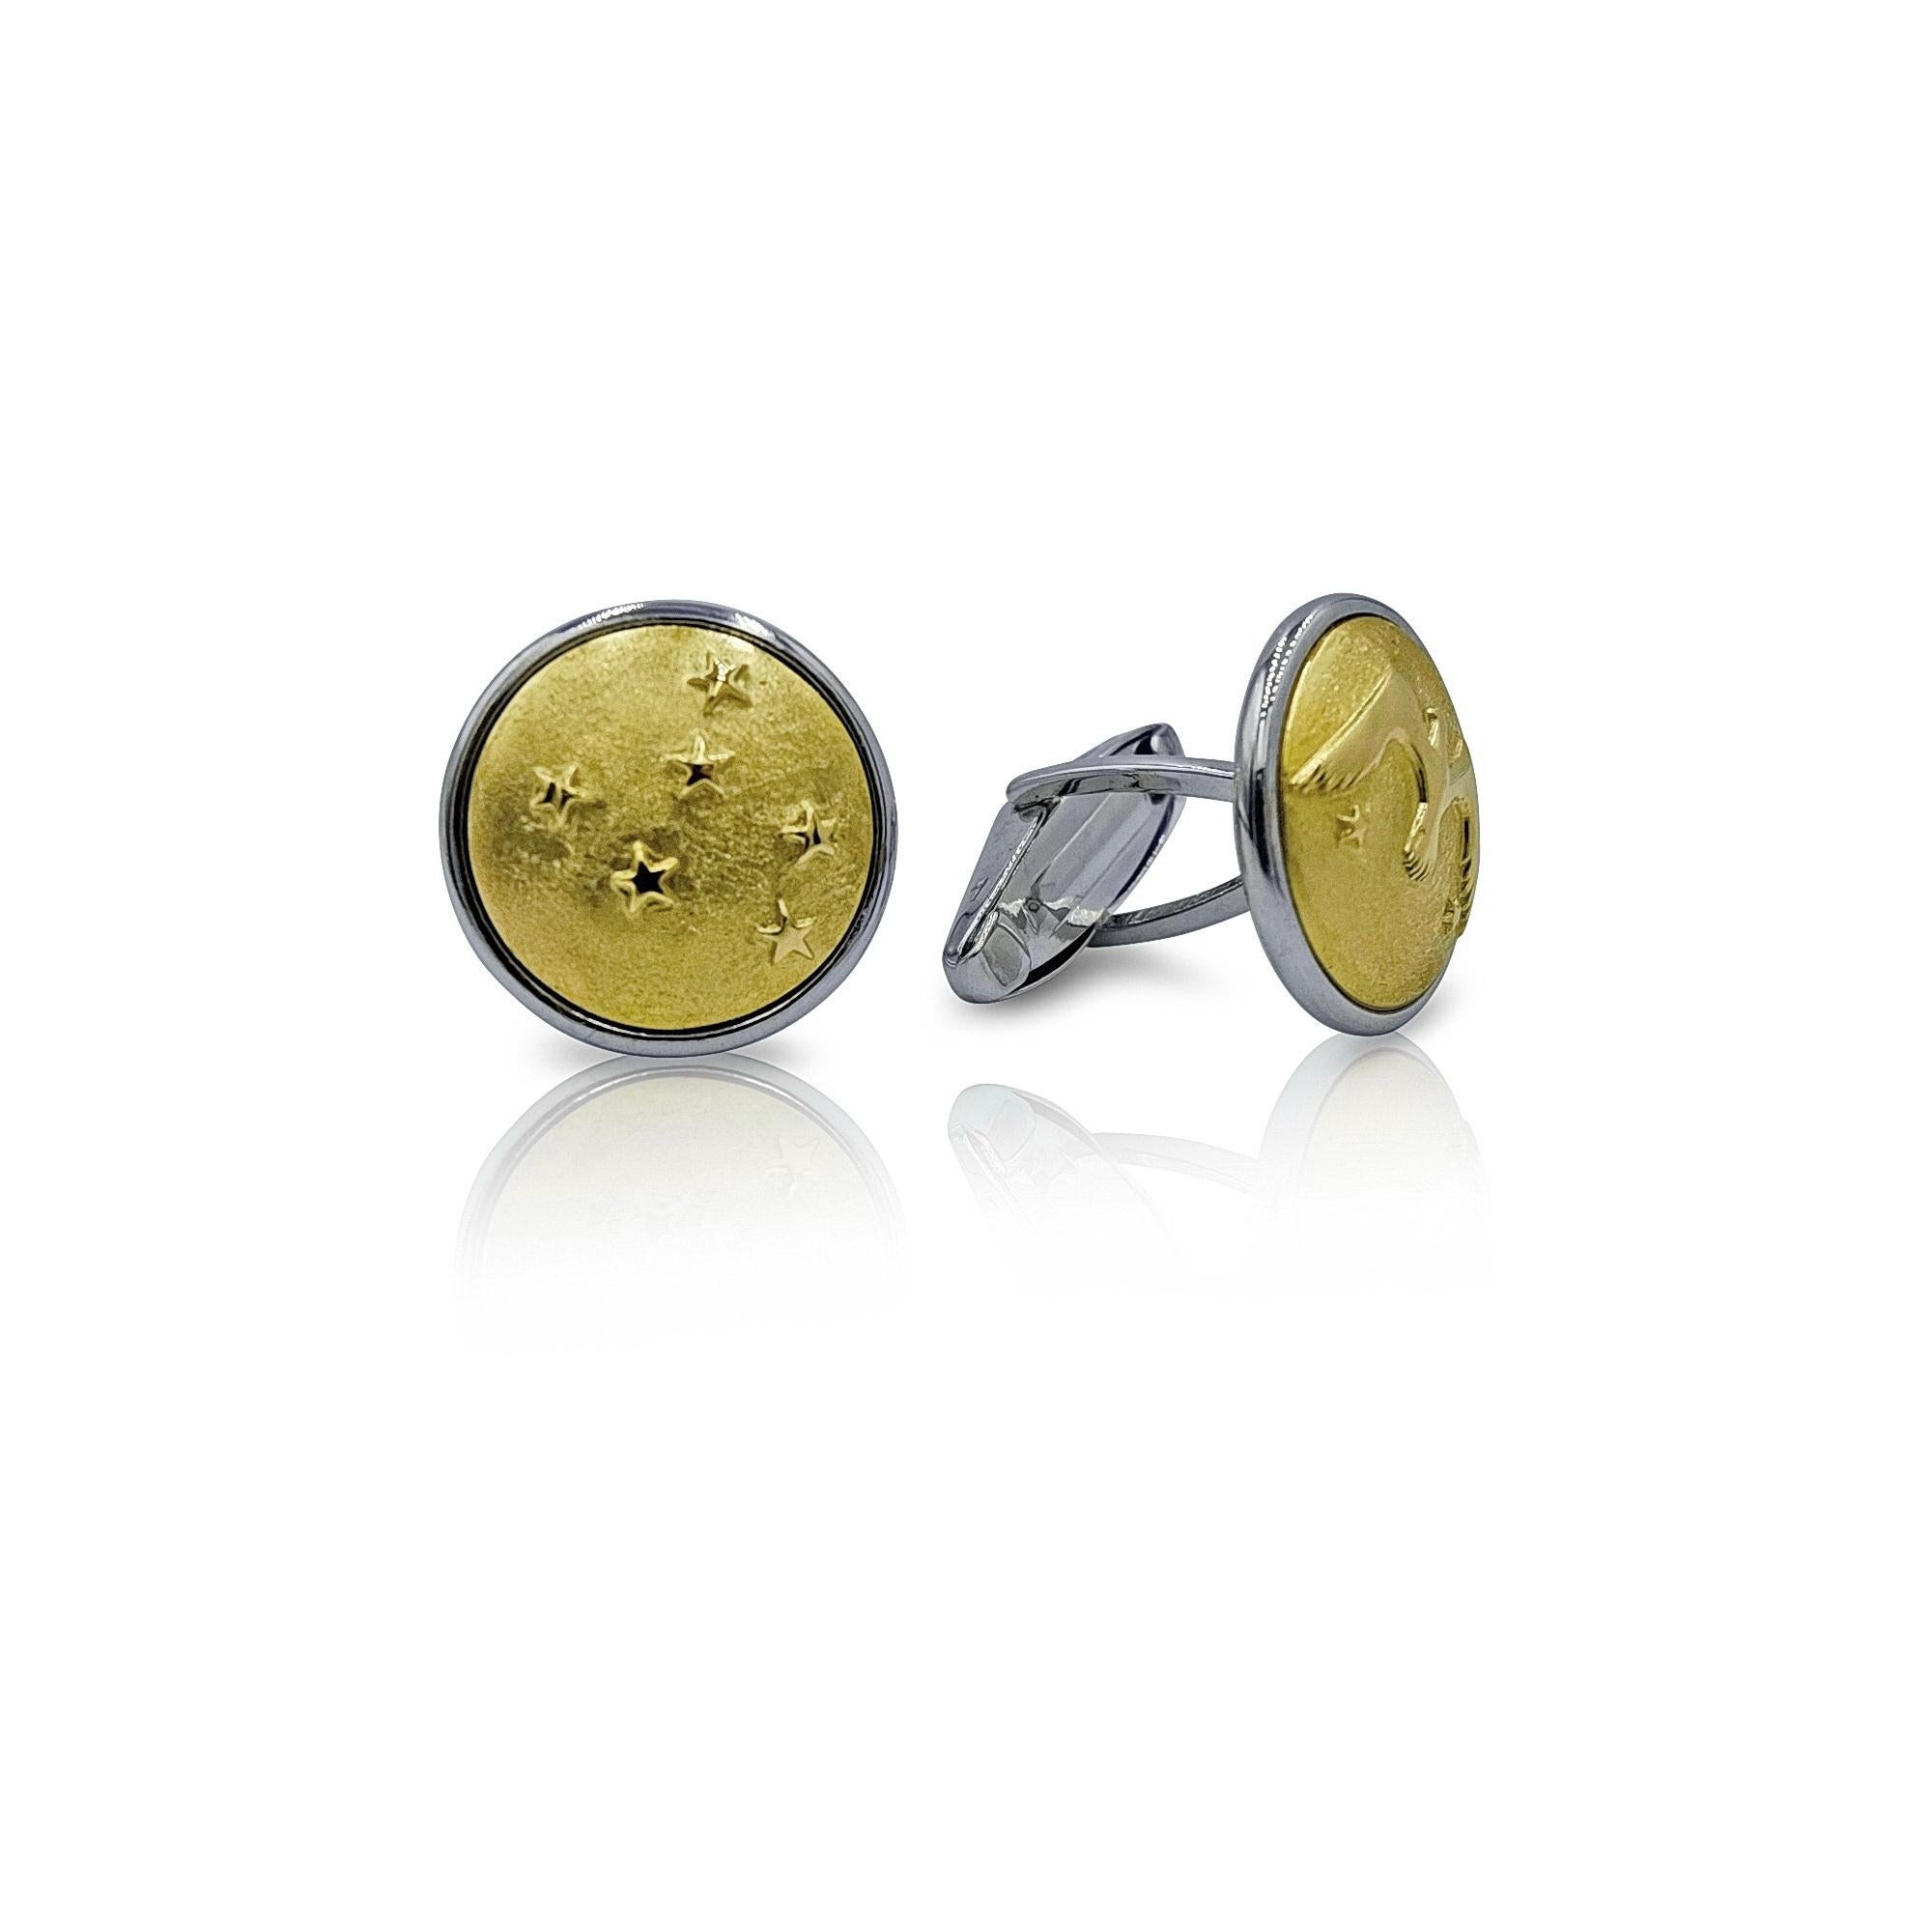 Contemporary Luca Jouel Decorative Eagle and Stars Cufflinks in Yellow Gold and Silver